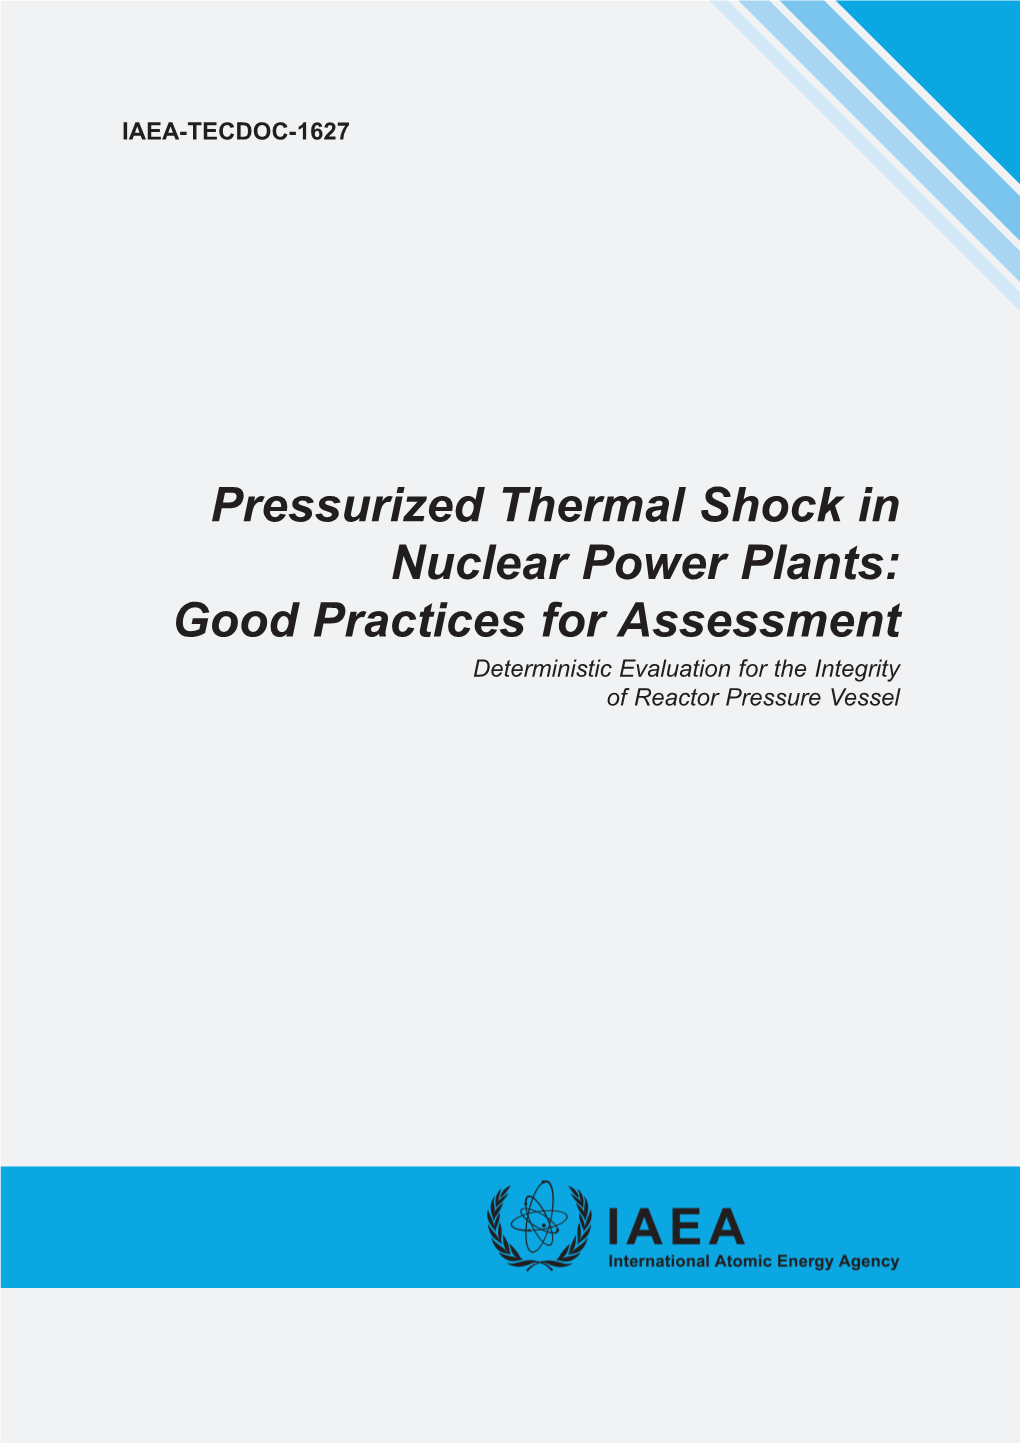 Pressurized Thermal Shock in Nuclear Power Plants: Good Practices for Assessment Deterministic Evaluation for the Integrity of Reactor Pressure Vessel